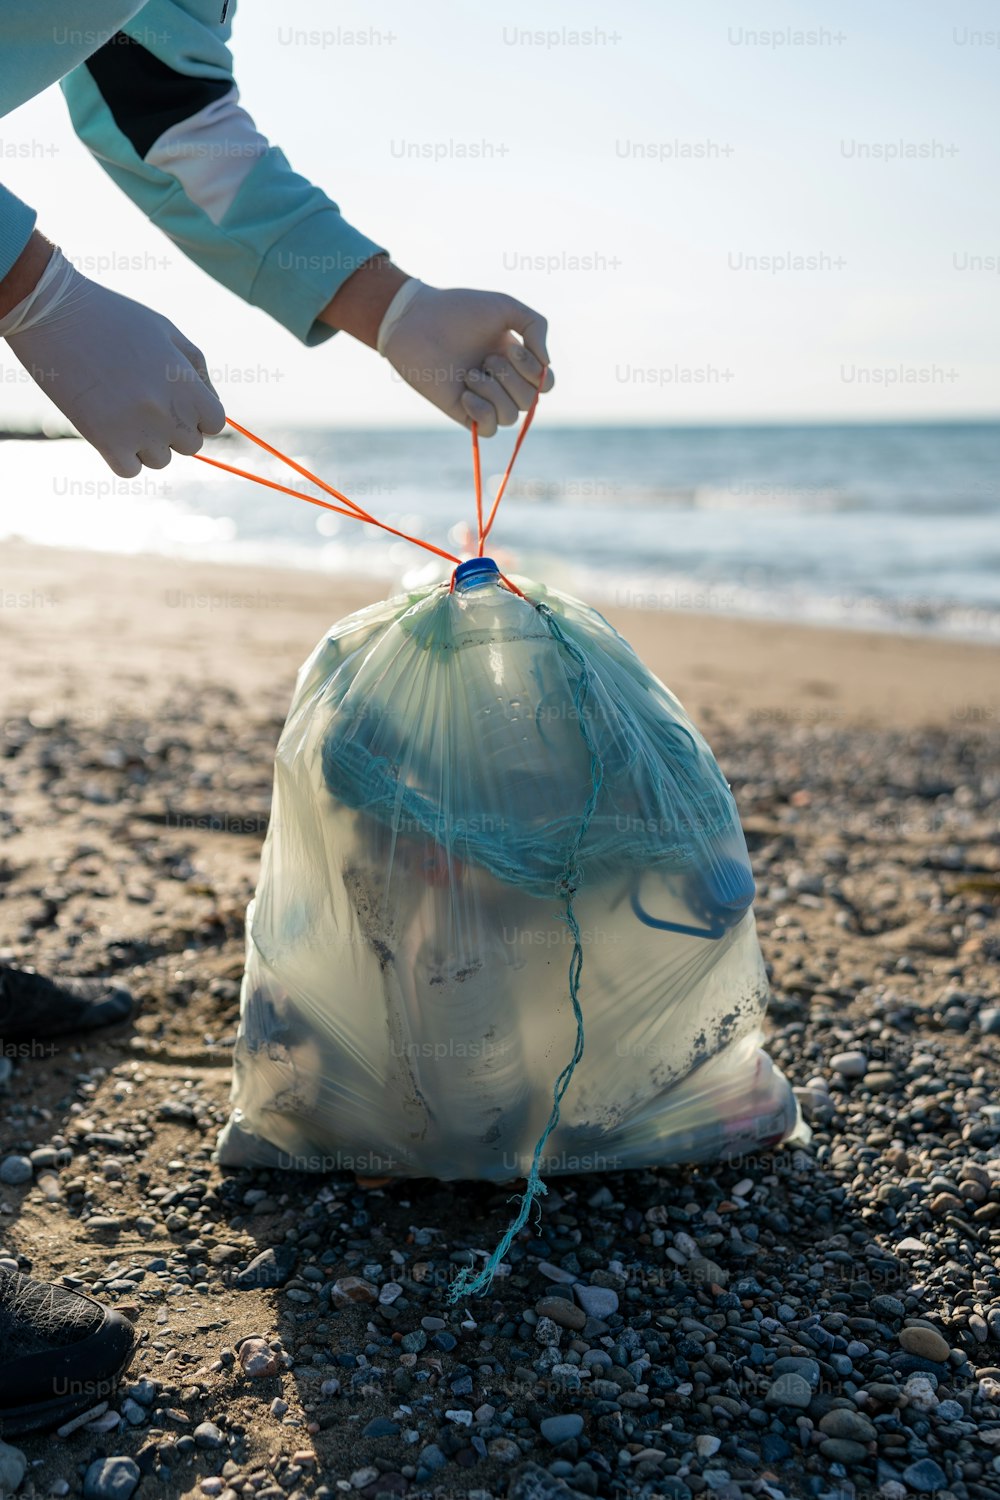 a person holding a plastic bag on the beach